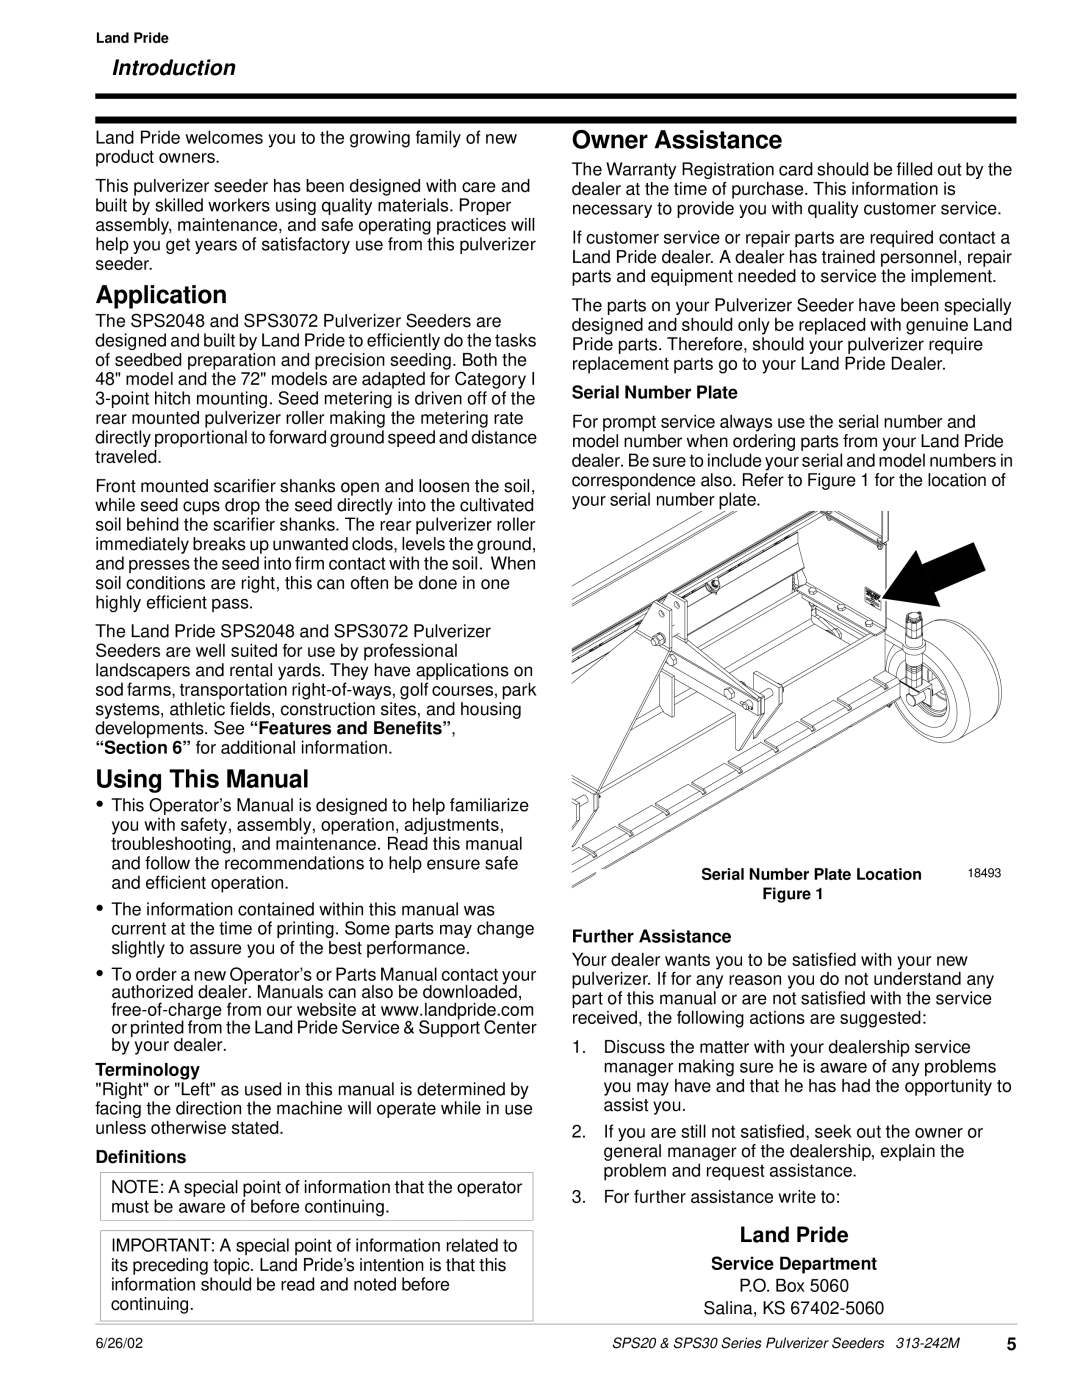 Land Pride SPS30 manual Application, Using This Manual, Owner Assistance, Introduction, Land Pride, Terminology, Deﬁnitions 